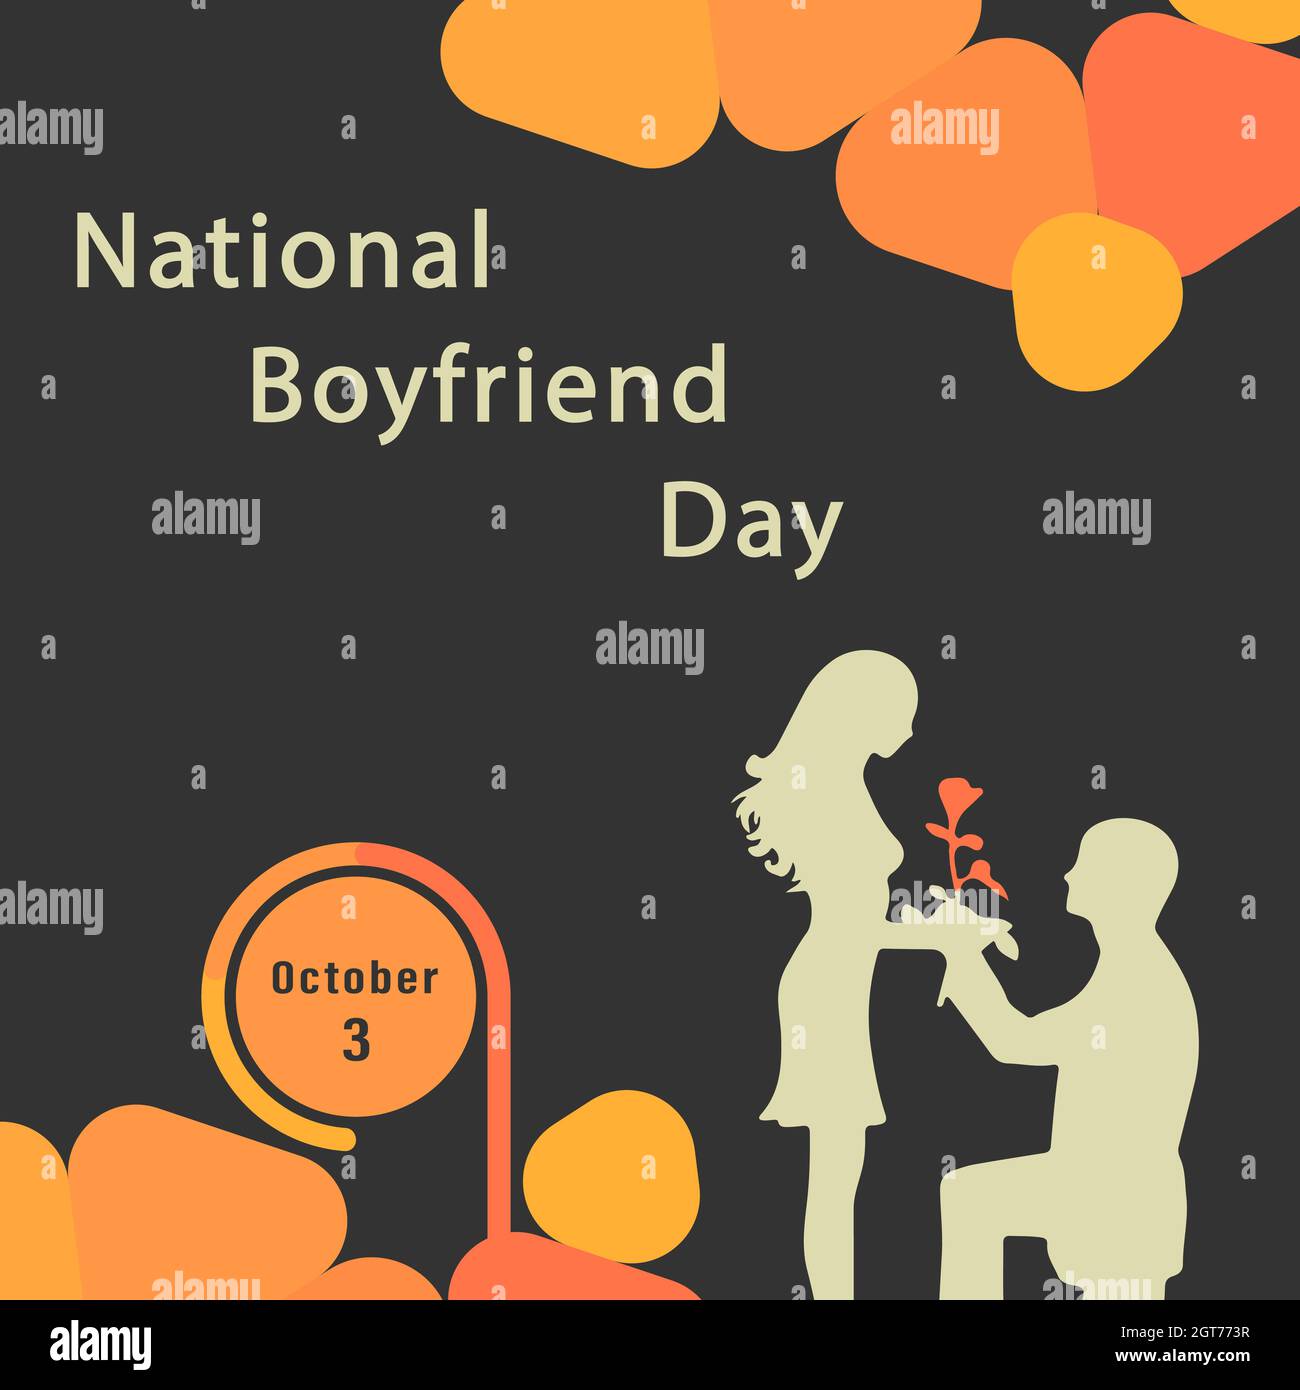 National Boyfriend Day reminds everyone with a boyfriend to take special notice of that special someone and how they make your life better. Stock Vector